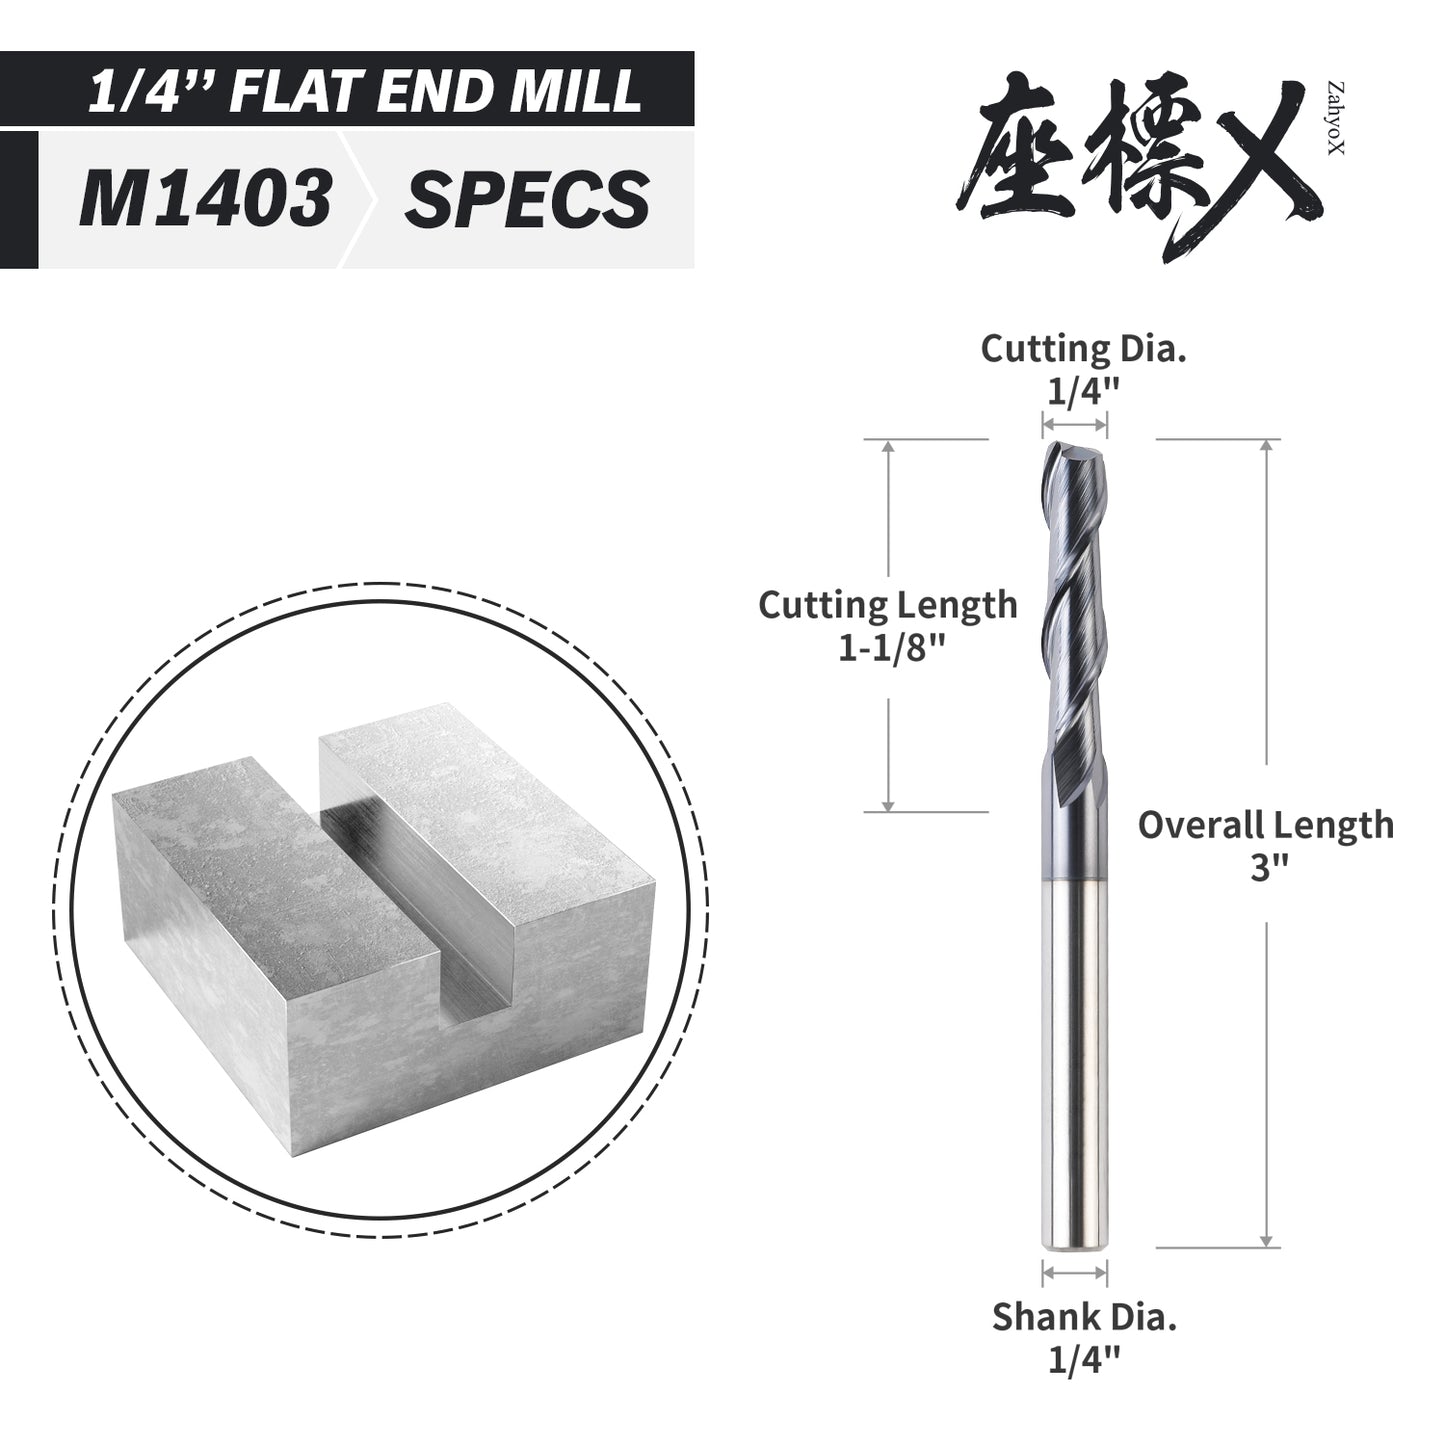 M1403 Solid Carbide TiAlN Coated Upcut Spiral Router Bit - 2 Flutes - 1/4 SD - 1/4 CD - 1-1/8 CL - 3 OL